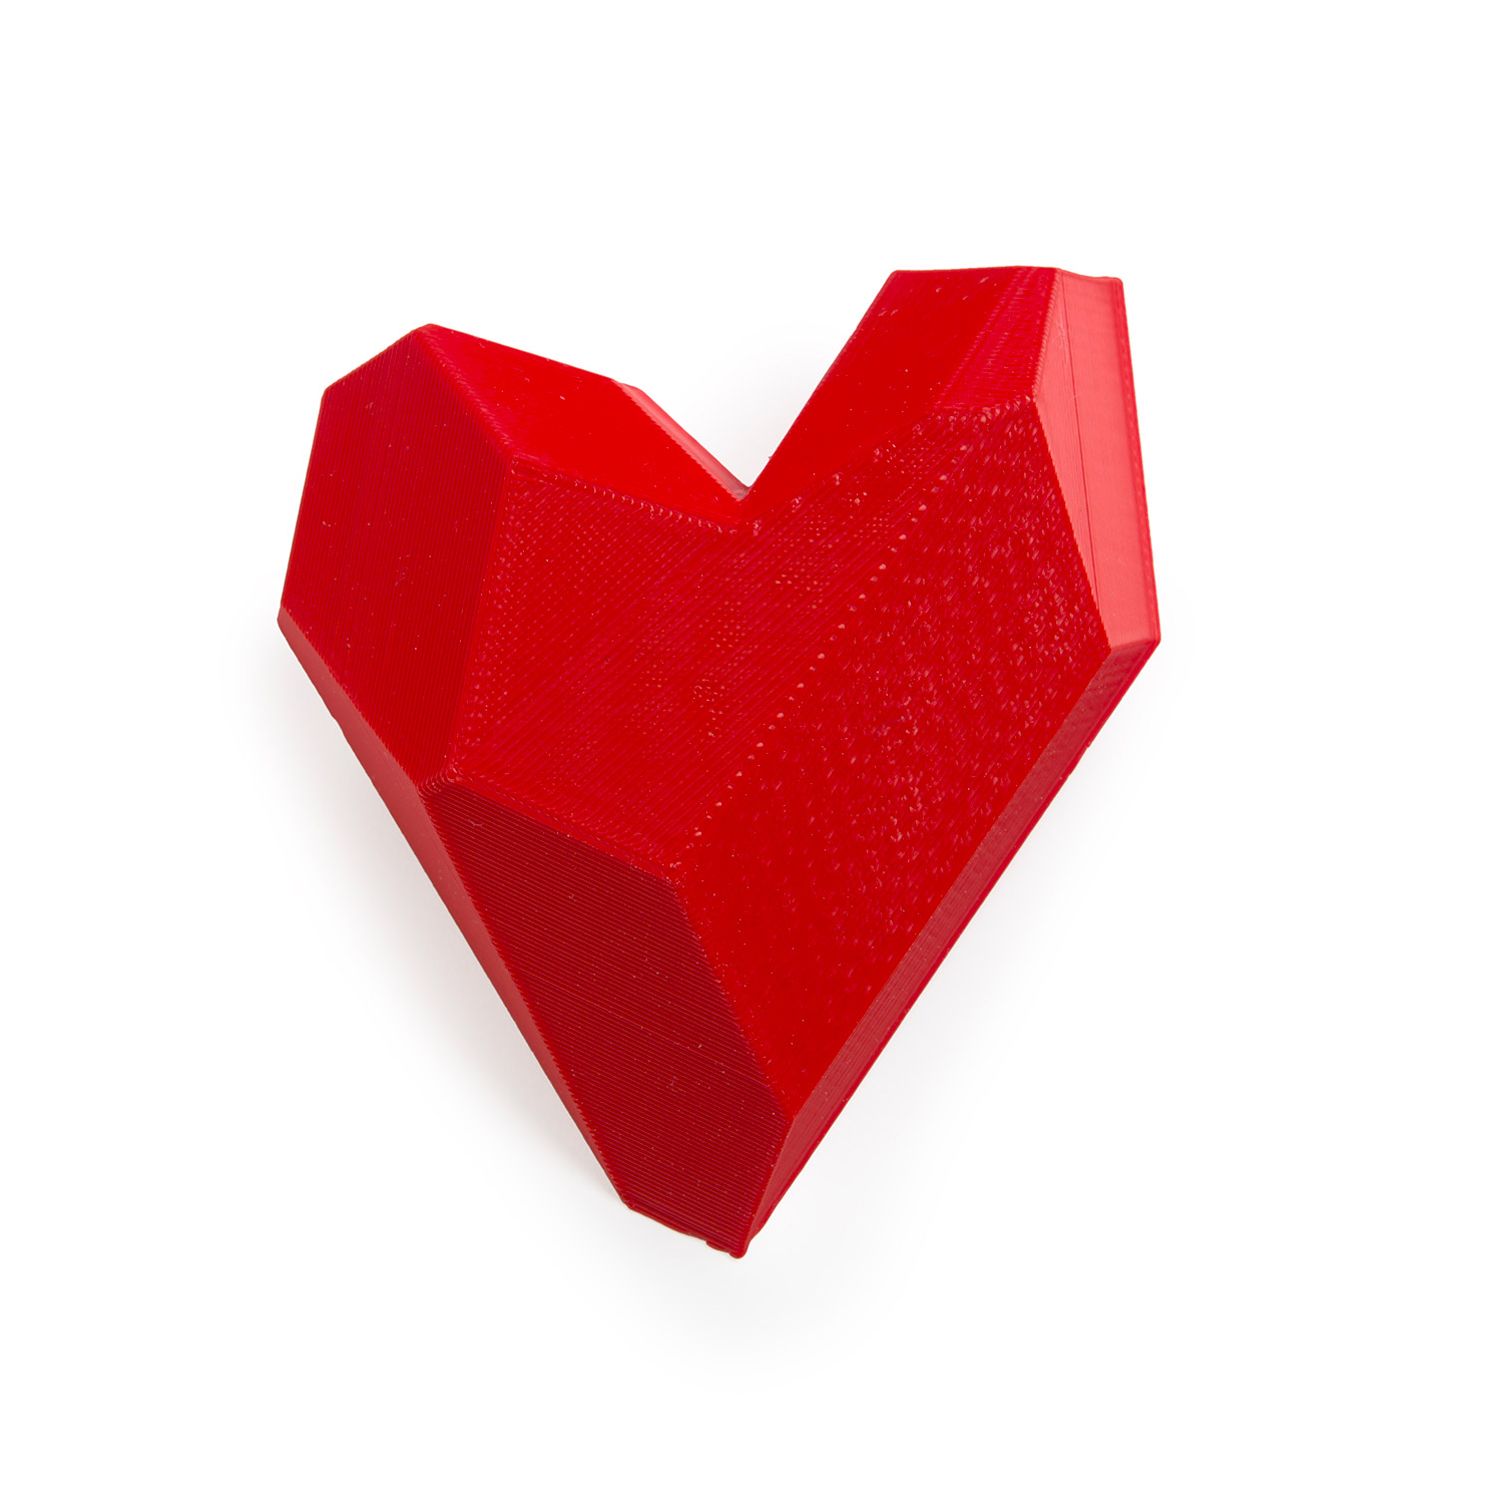 Maison 203: Heart Brooch – Red Product Image 1 of 3